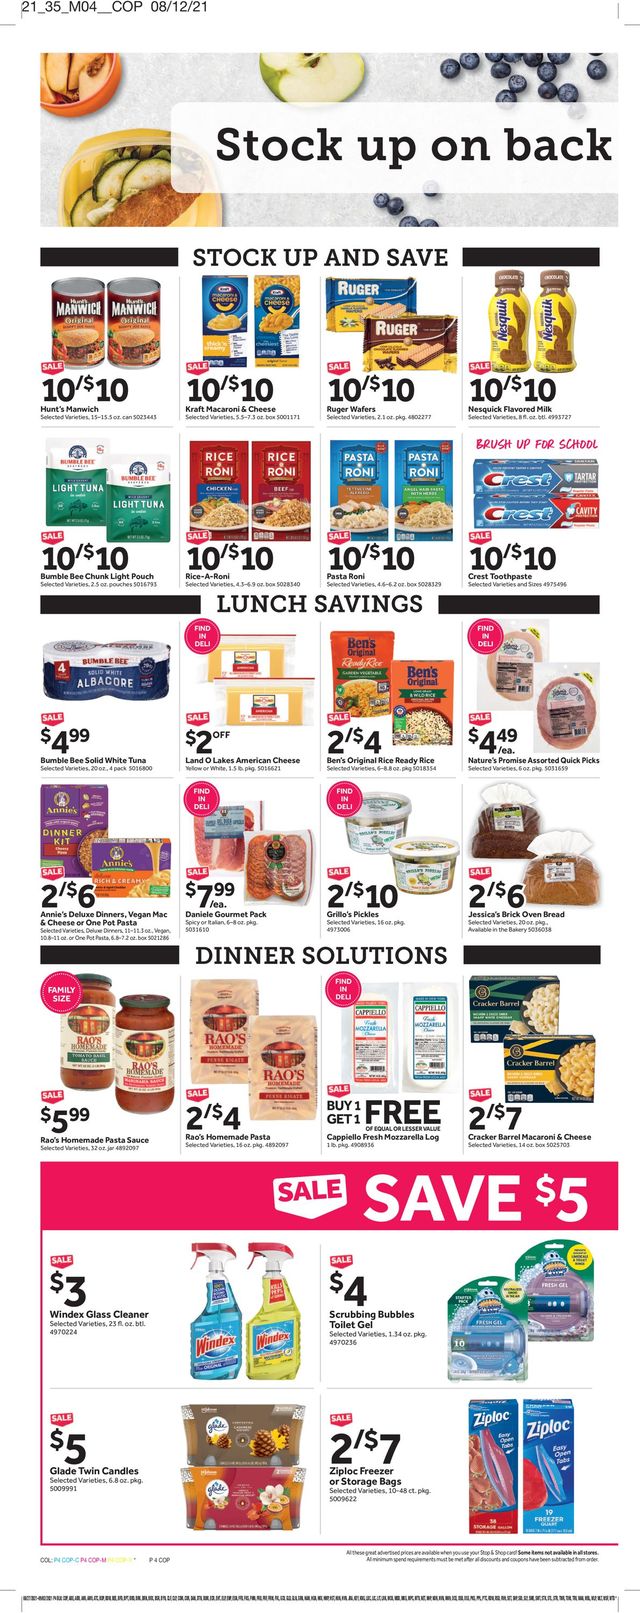 Stop and Shop Ad from 08/27/2021